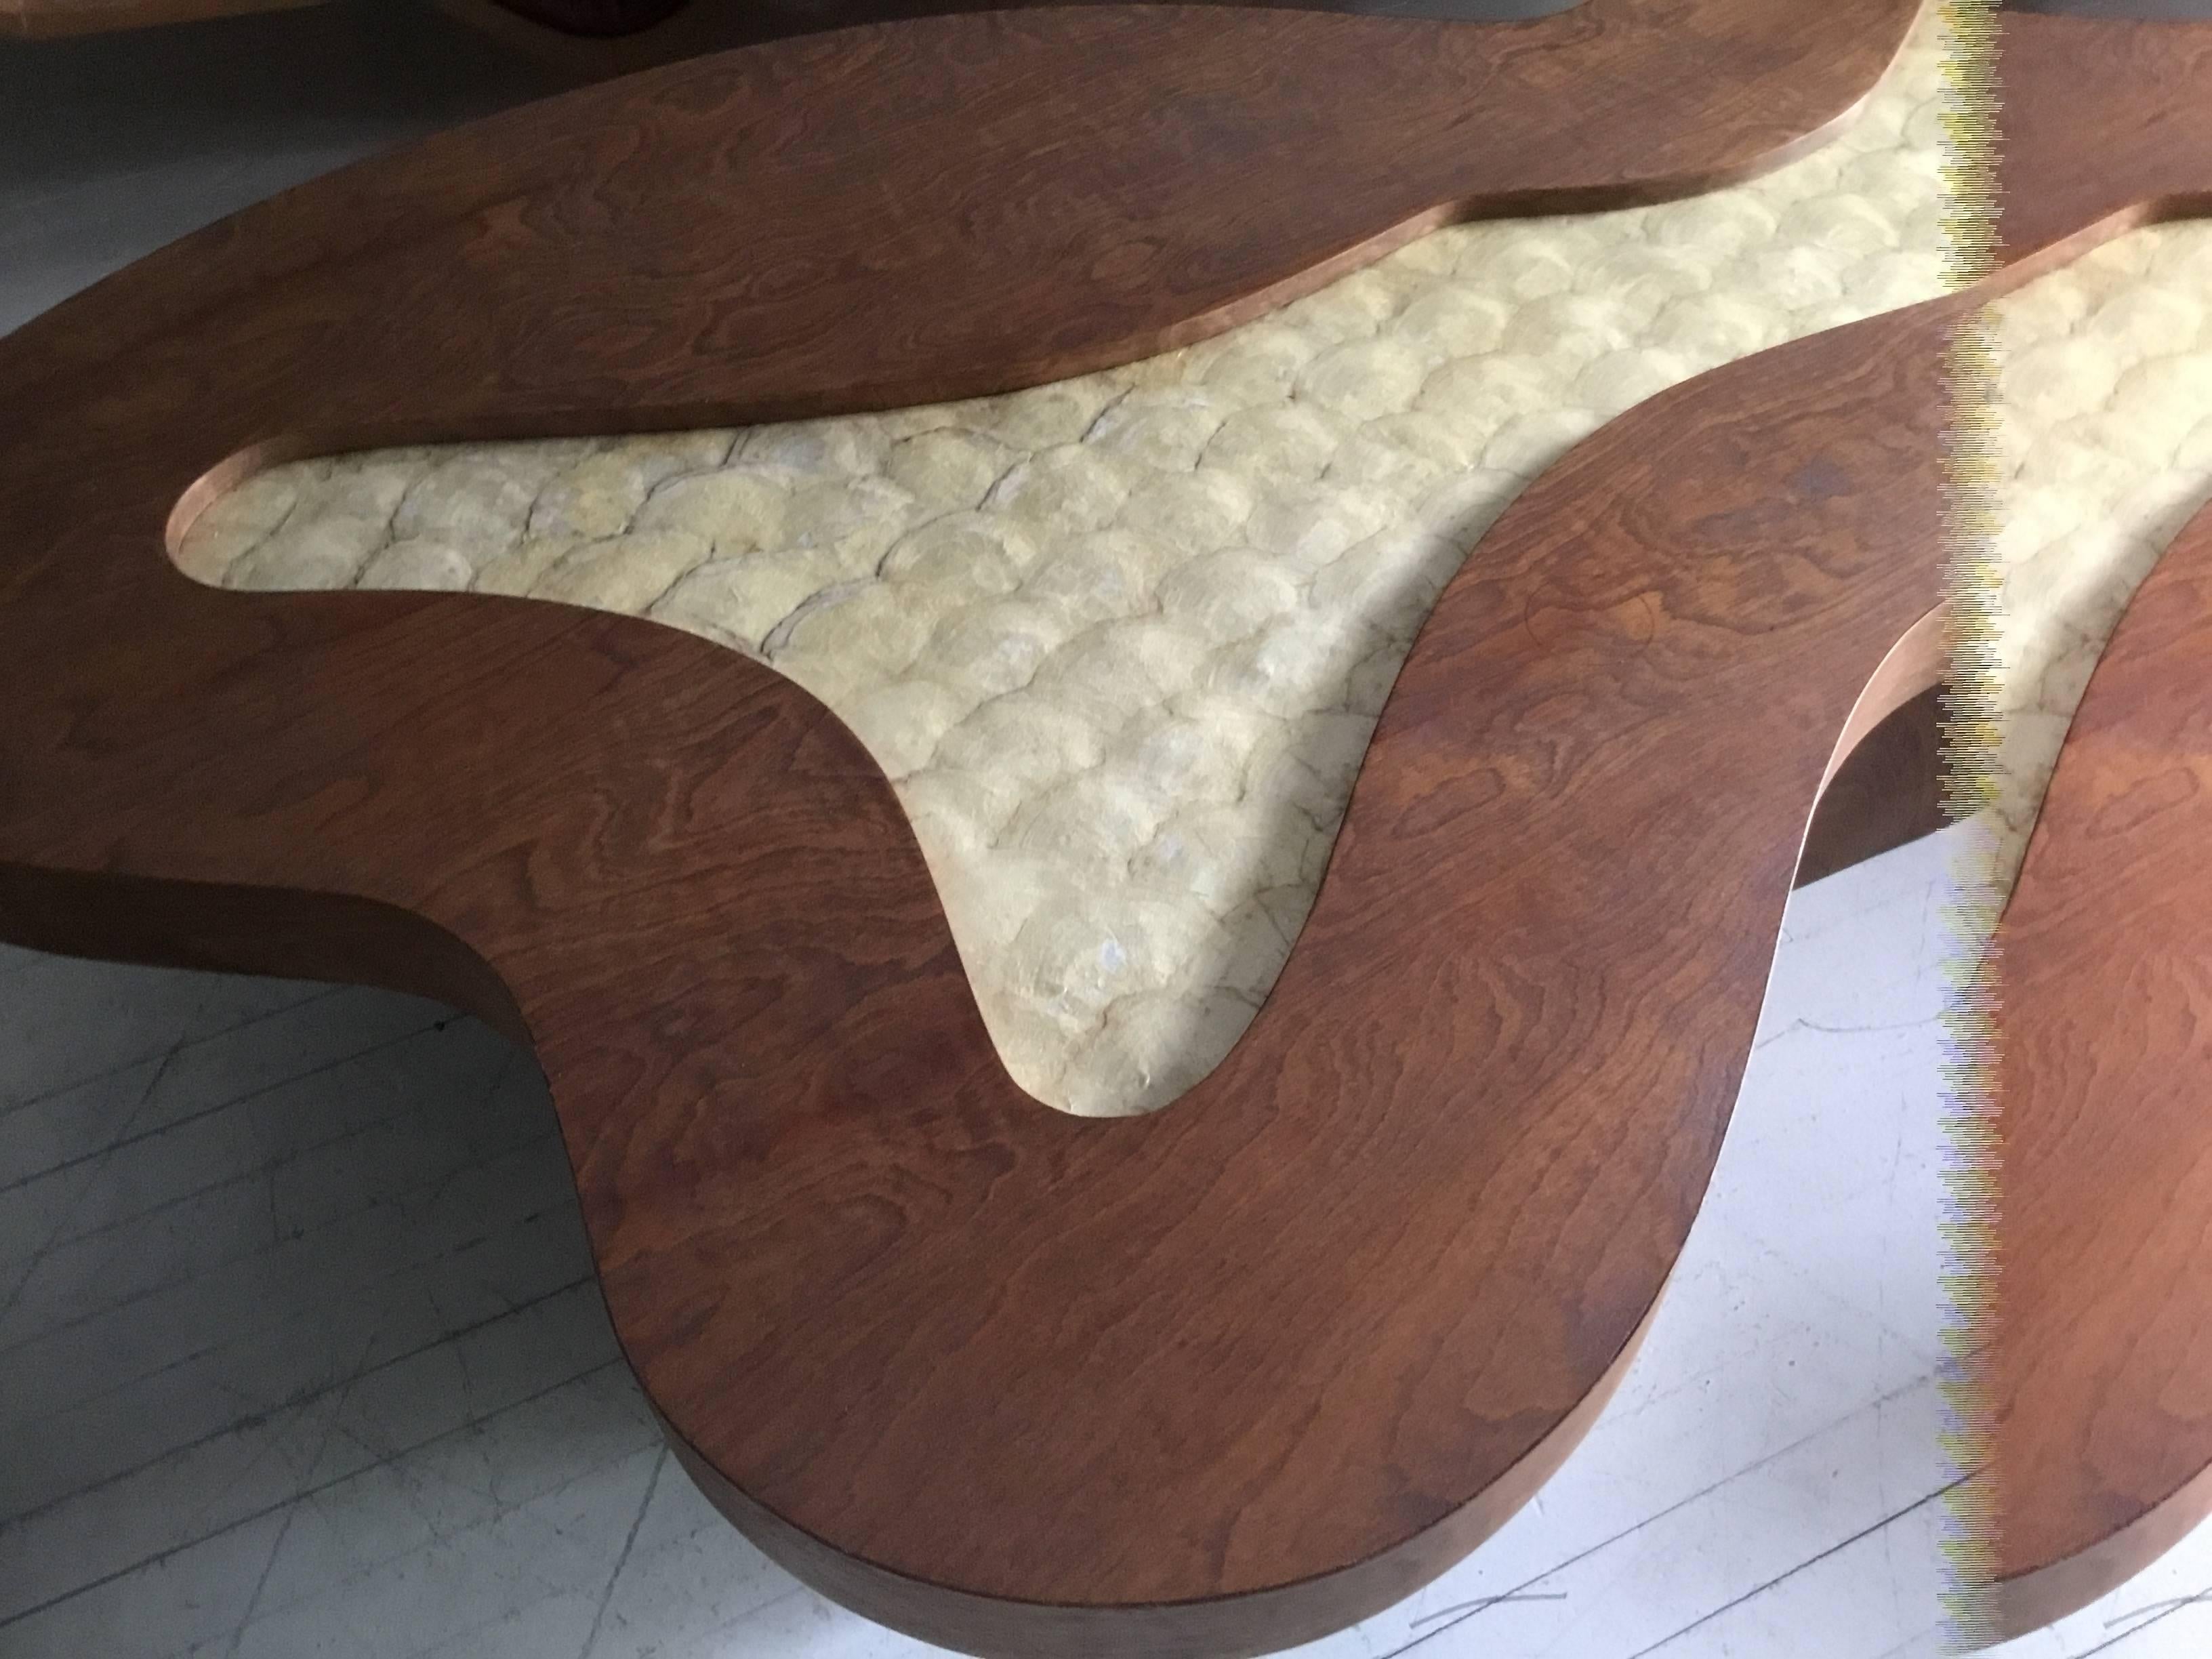 This coffee table is in the manner of Robsjohn-Gibbings. The shell top is original. The legs follow the curve of the top.